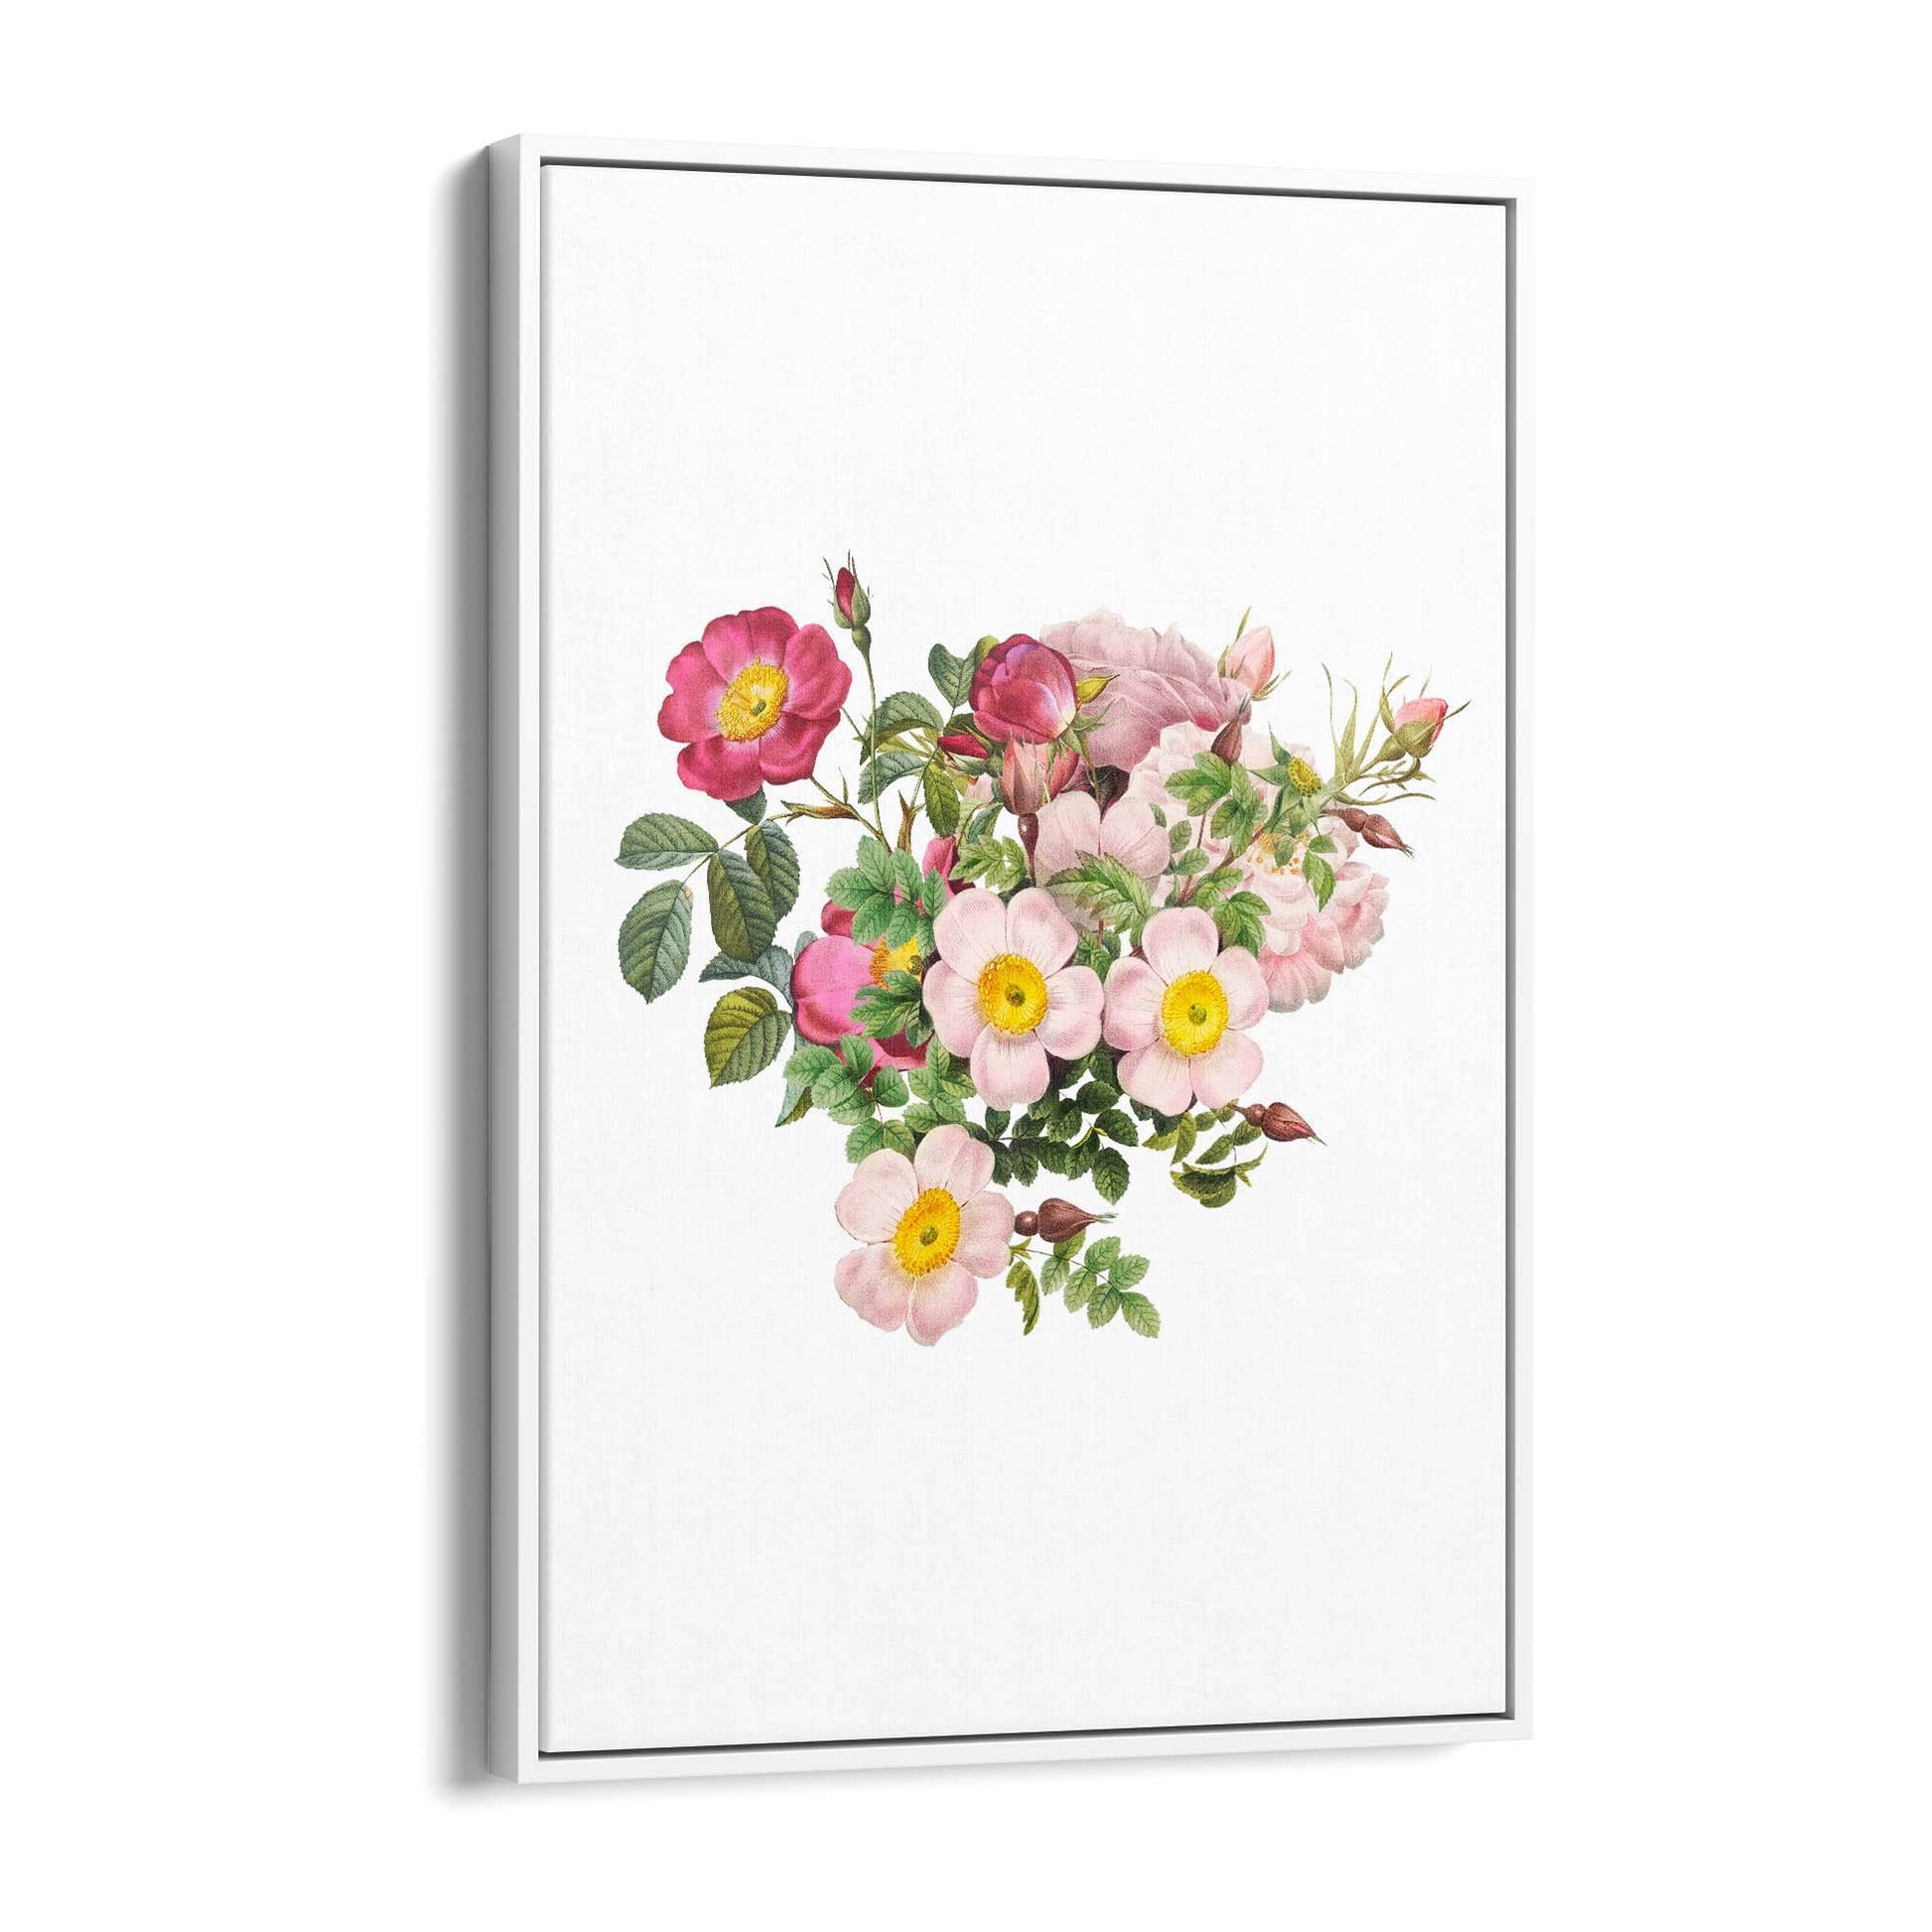 Botanical Flower Painting Floral Kitchen Wall Art #4 - The Affordable Art Company